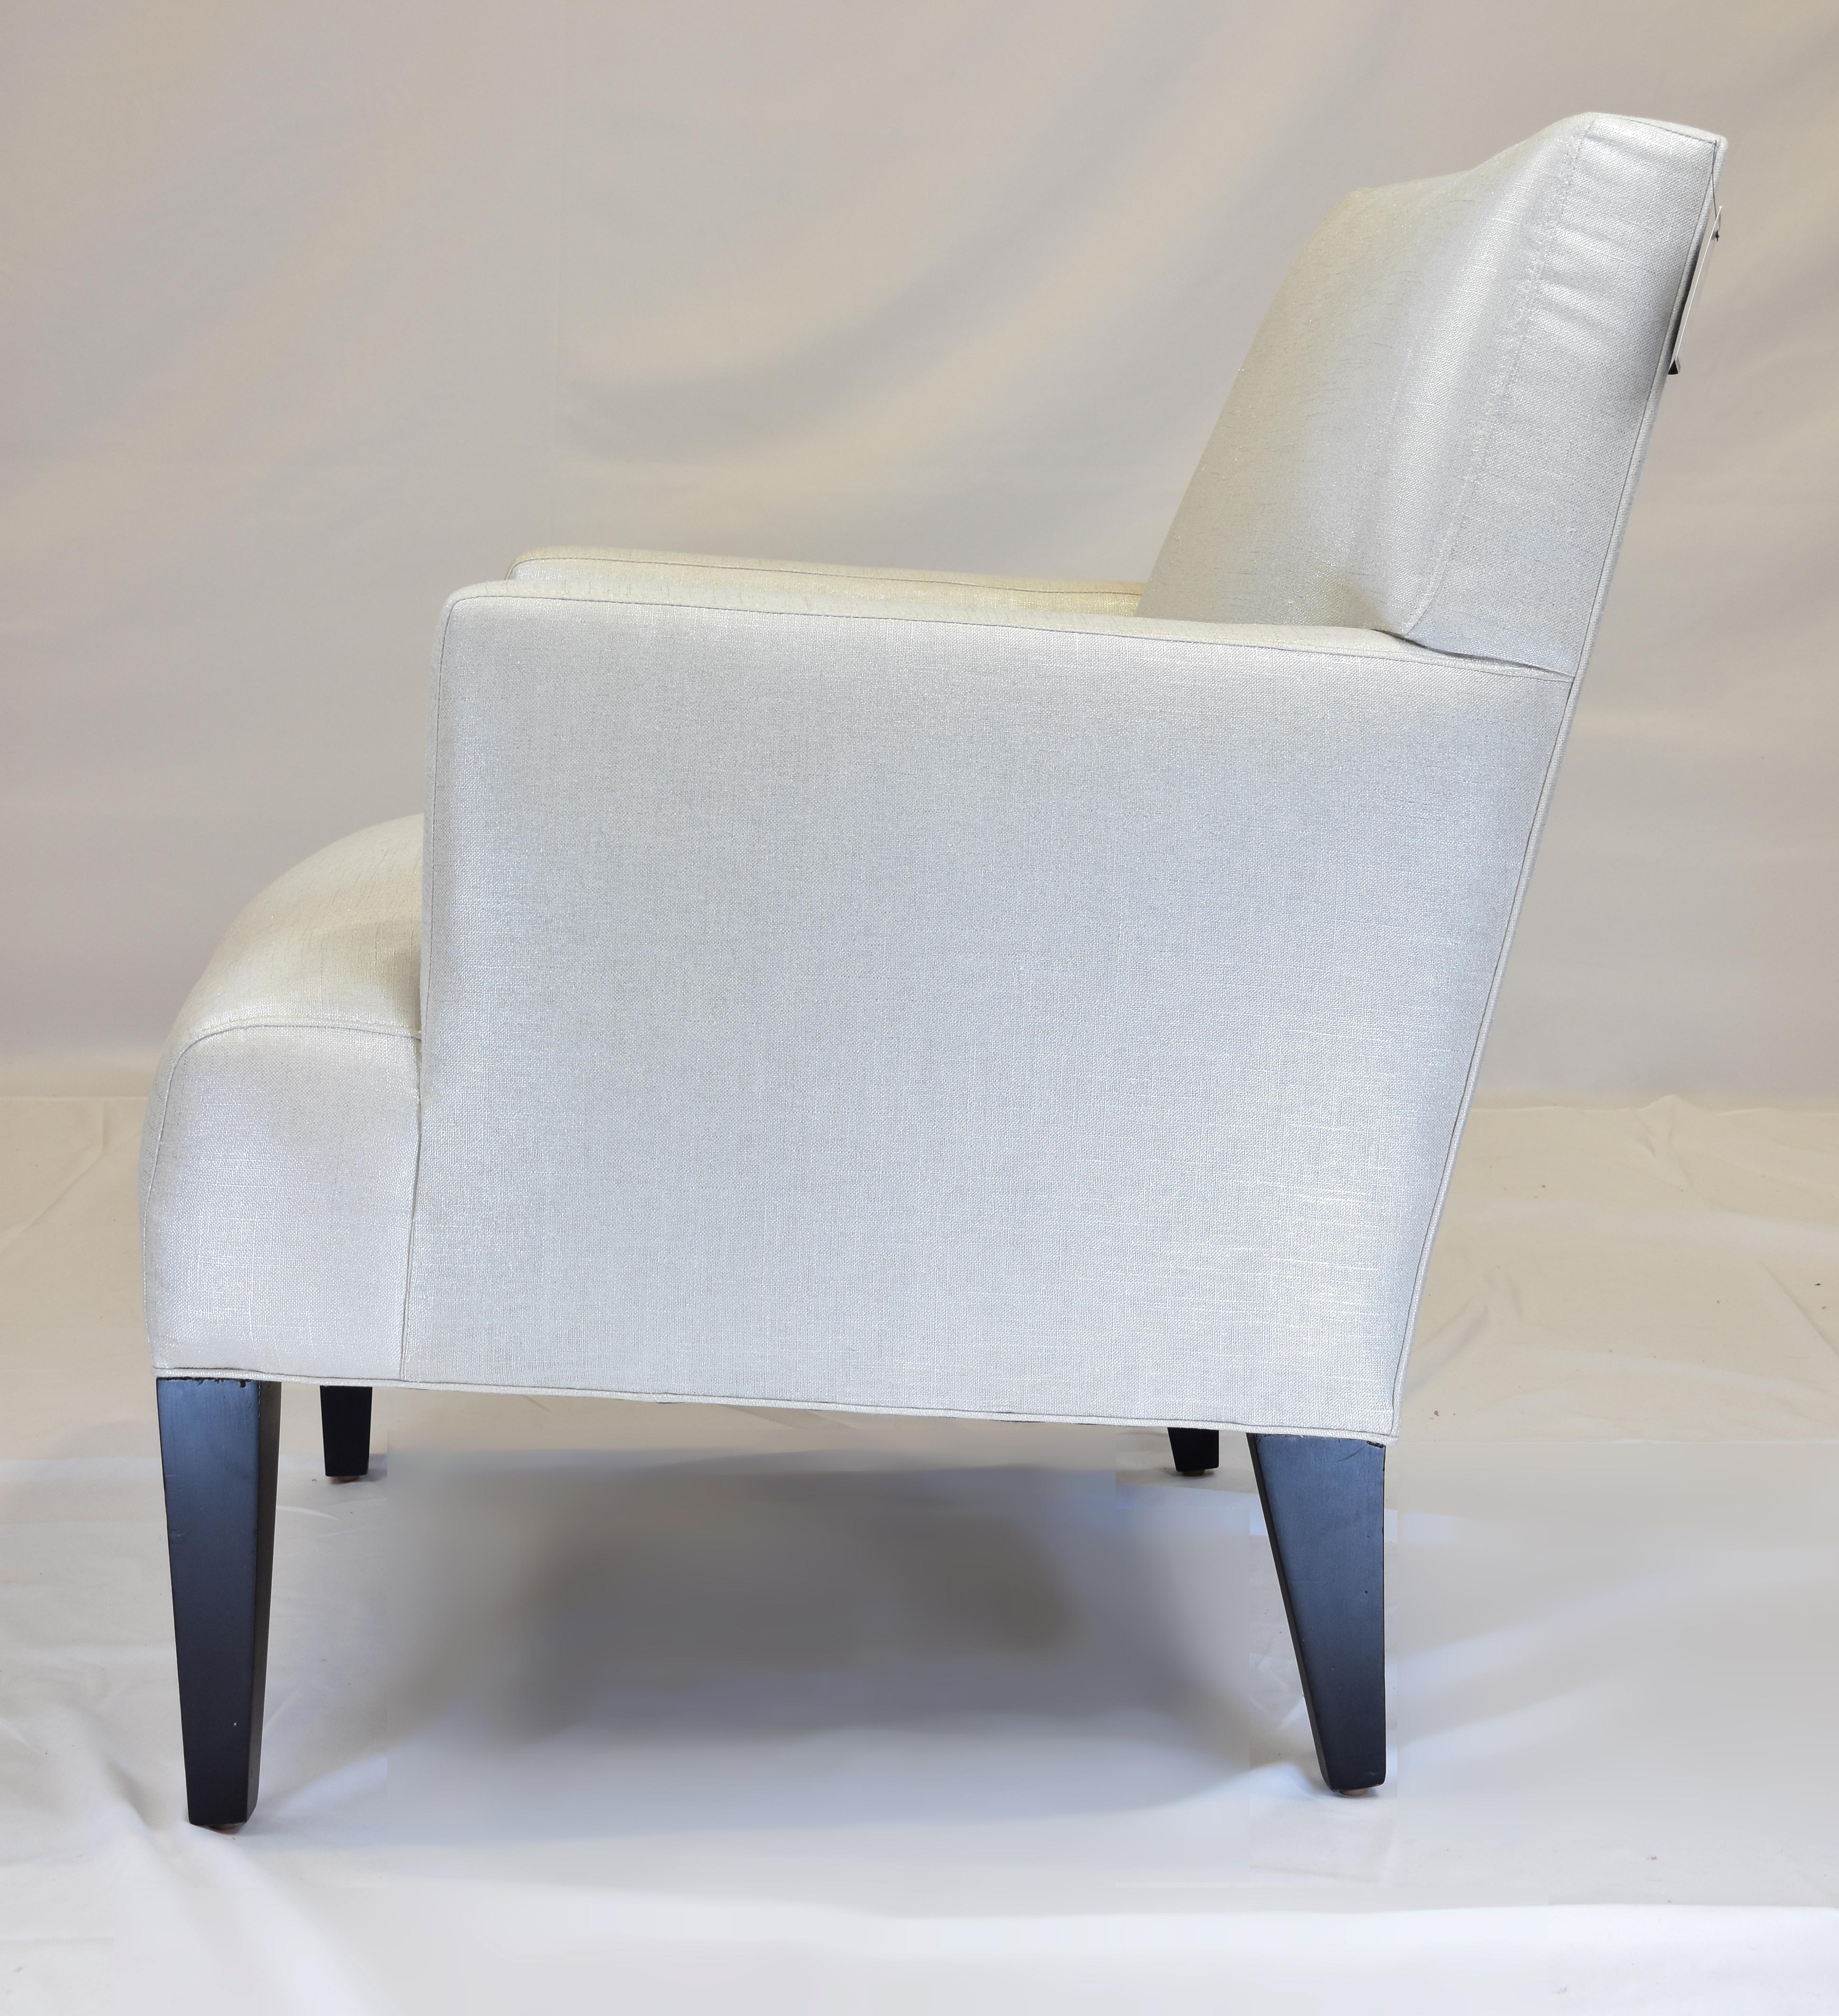 Le Jeune Upholstery Jasmine Armchair Showroom Model In Good Condition For Sale In Miami, FL